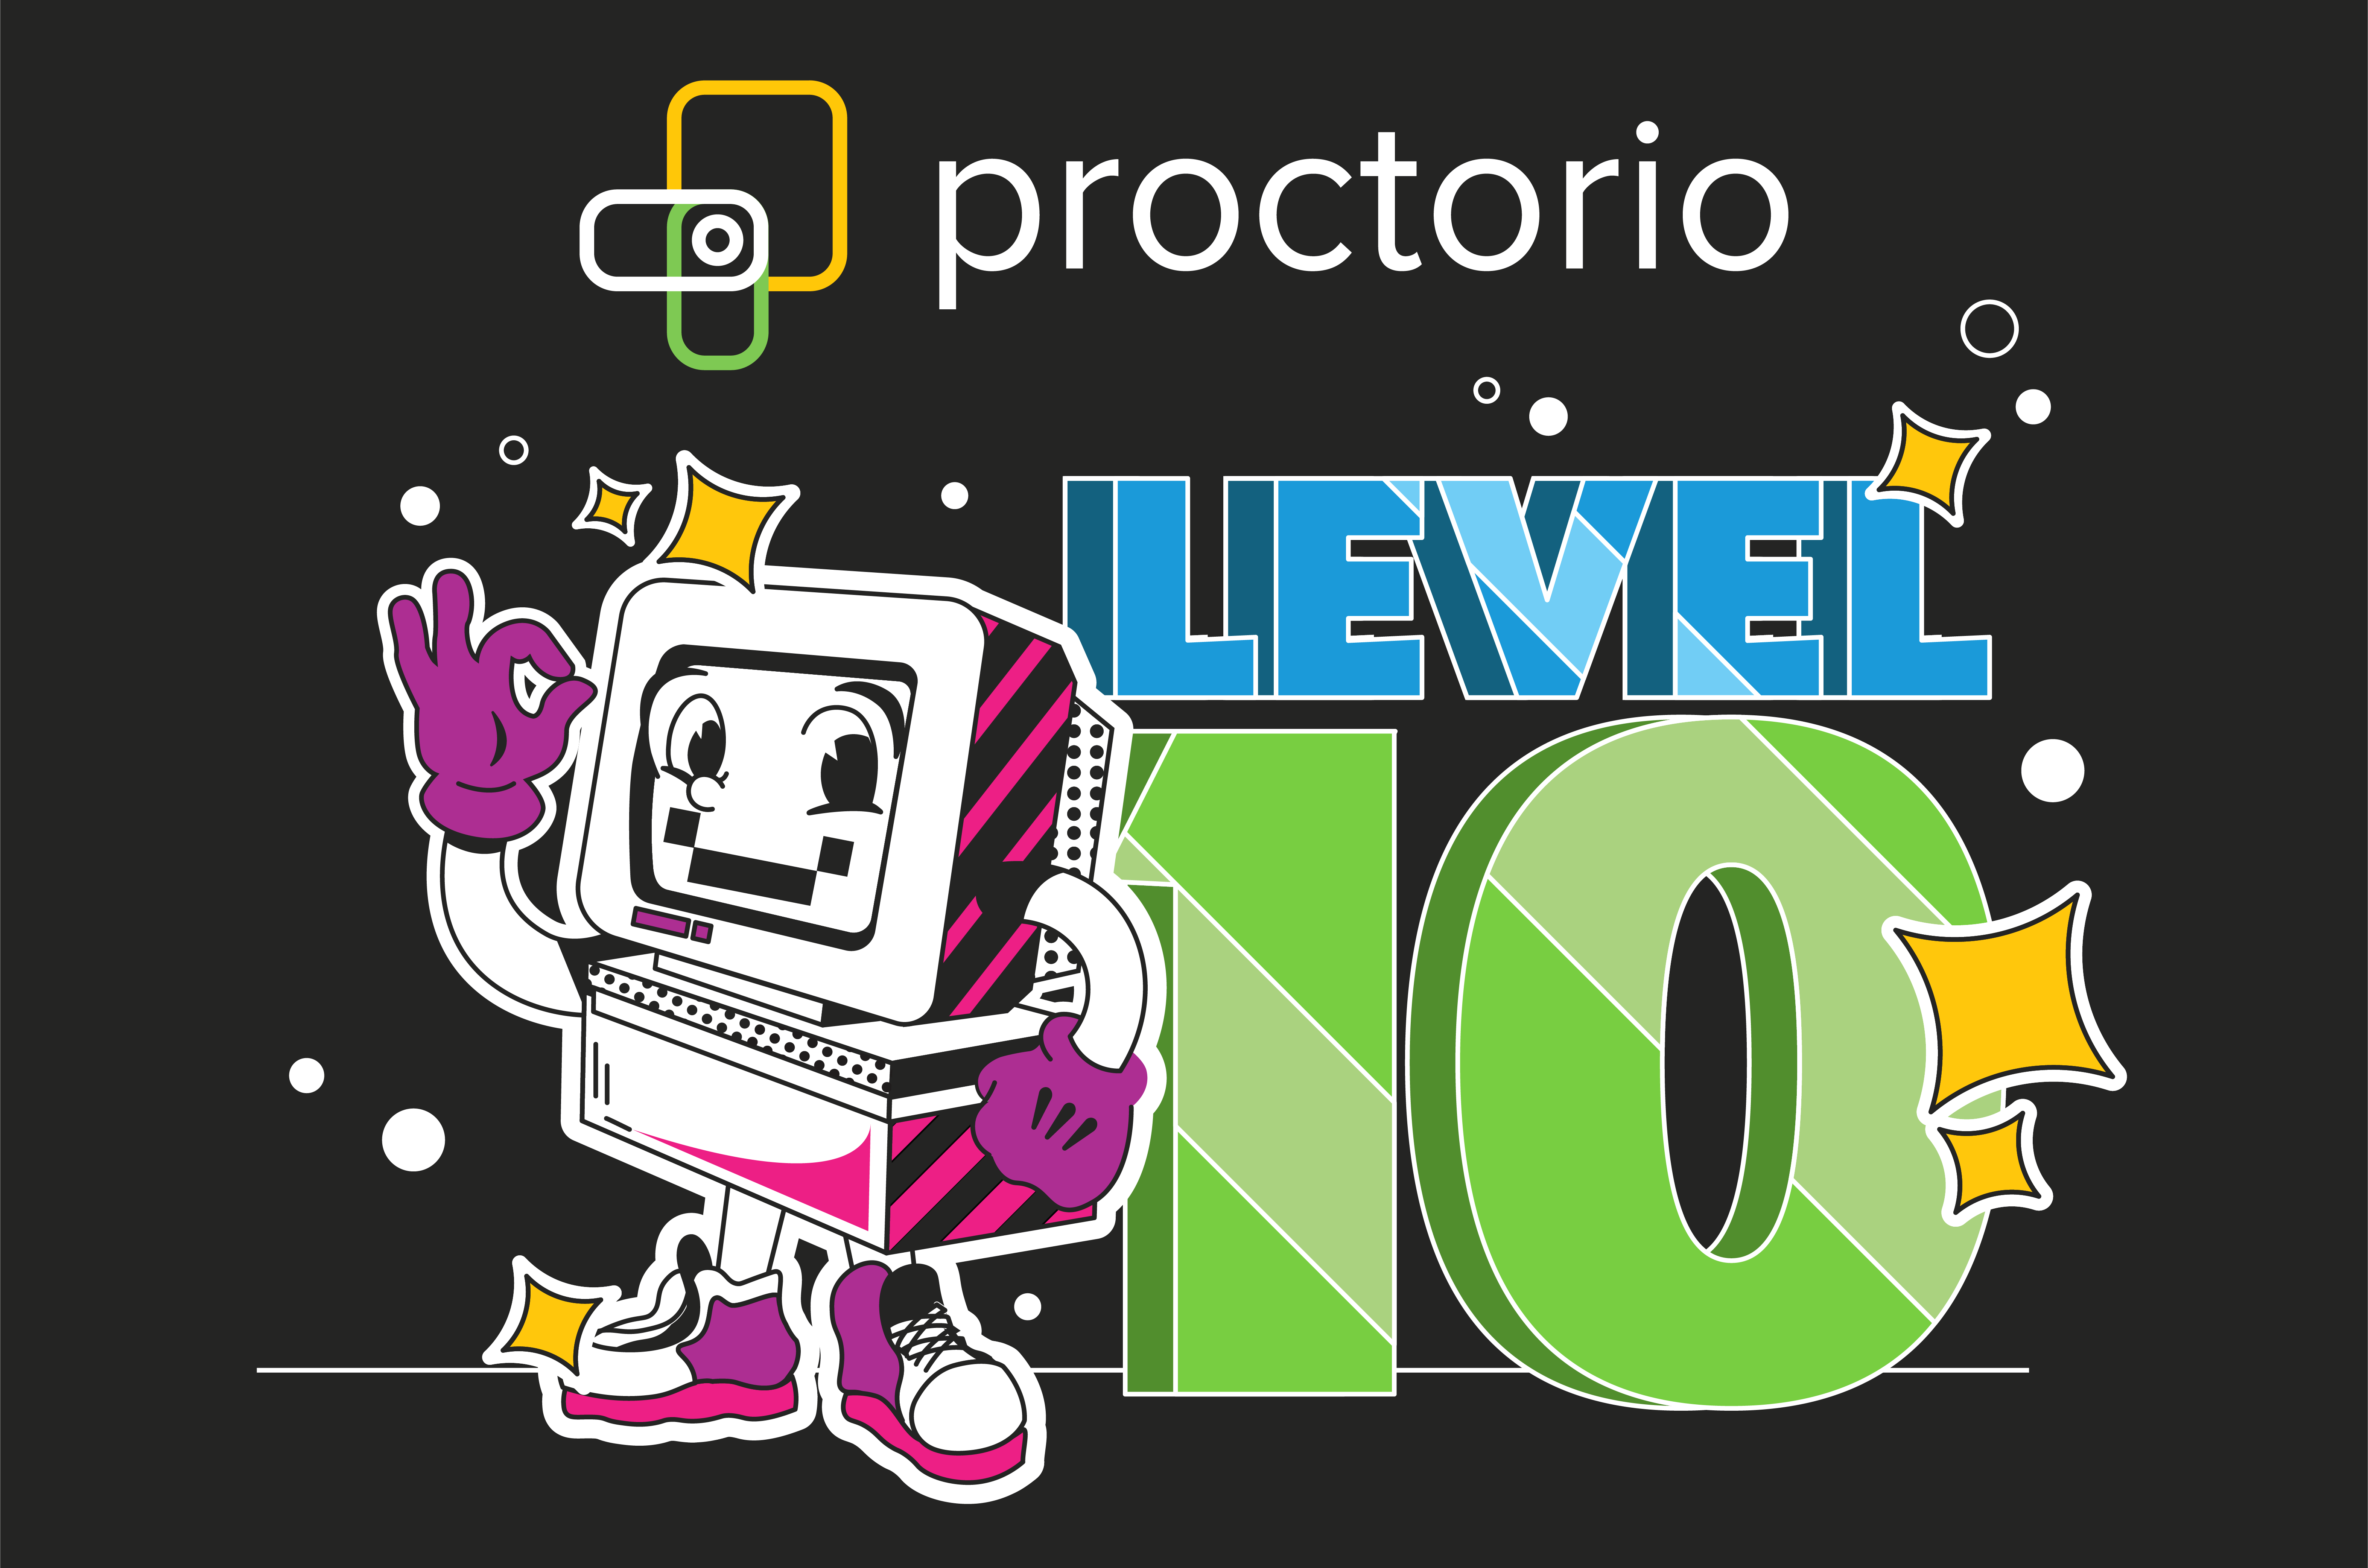 A purple, pink, and white happy robot standing next to a giant blue and green Level 10, with the proctorio logo above both of them.